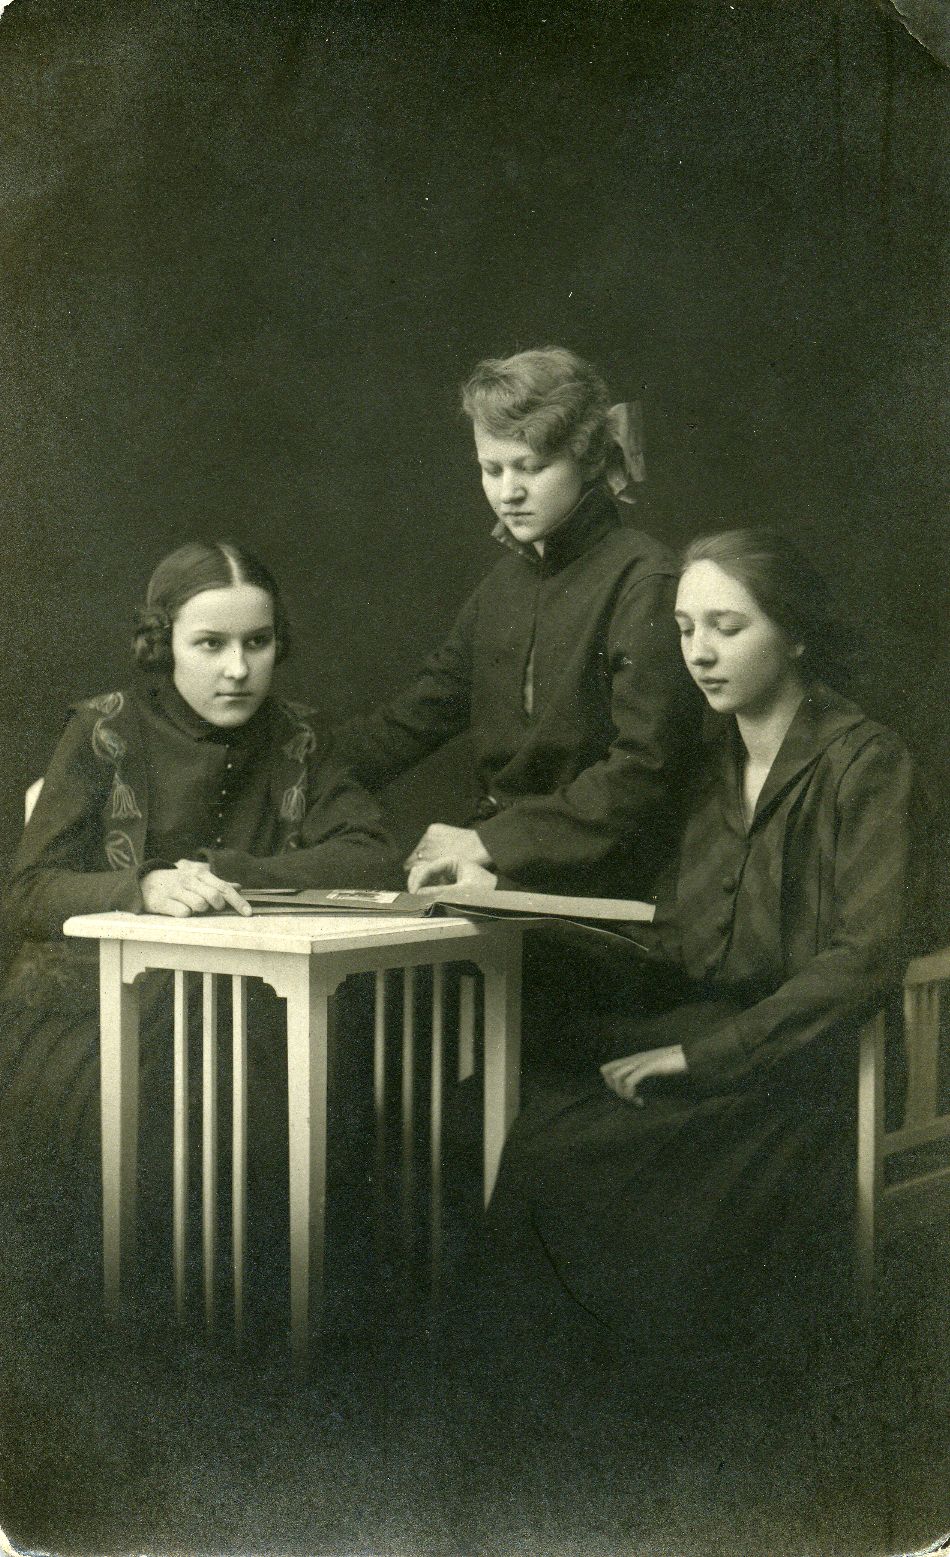 E.N.K.S. Students of the girls' Gymnasium. Betti Alver, Elfriede Jaska and